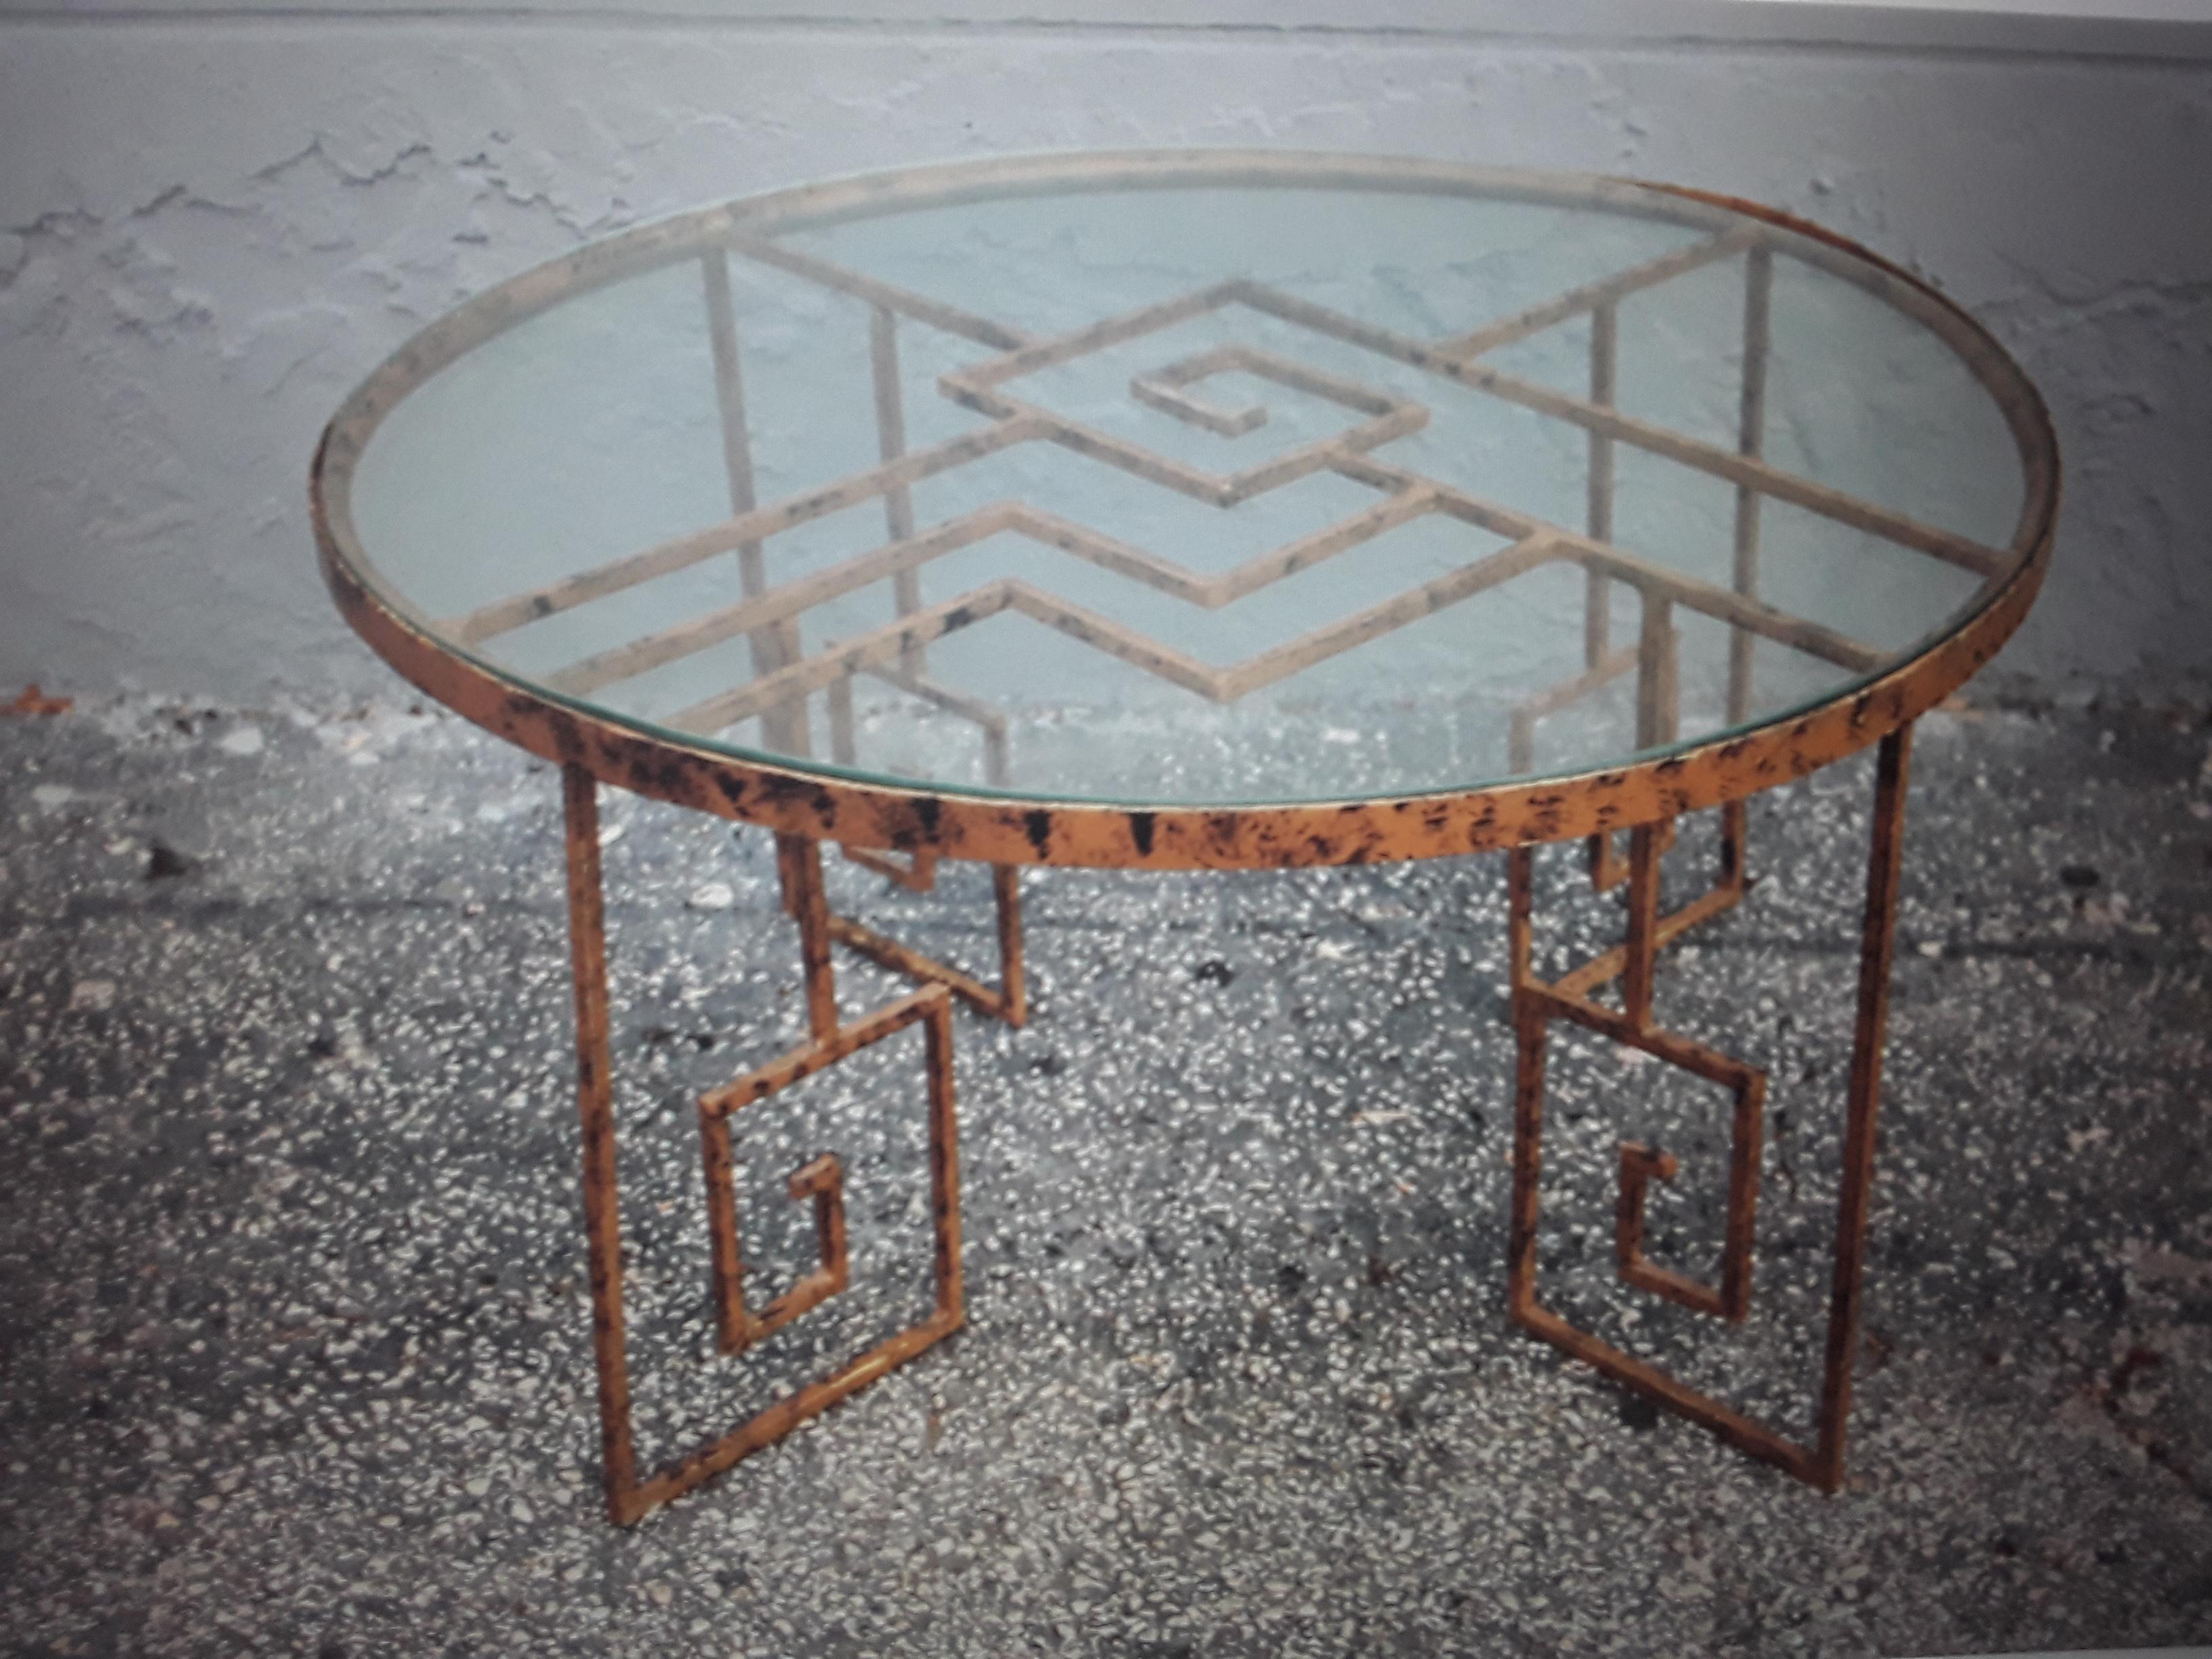 Vintage 1970's Gilt Metal Art Deco style Coffee / Cocktail Table. Lovely greek key detail.